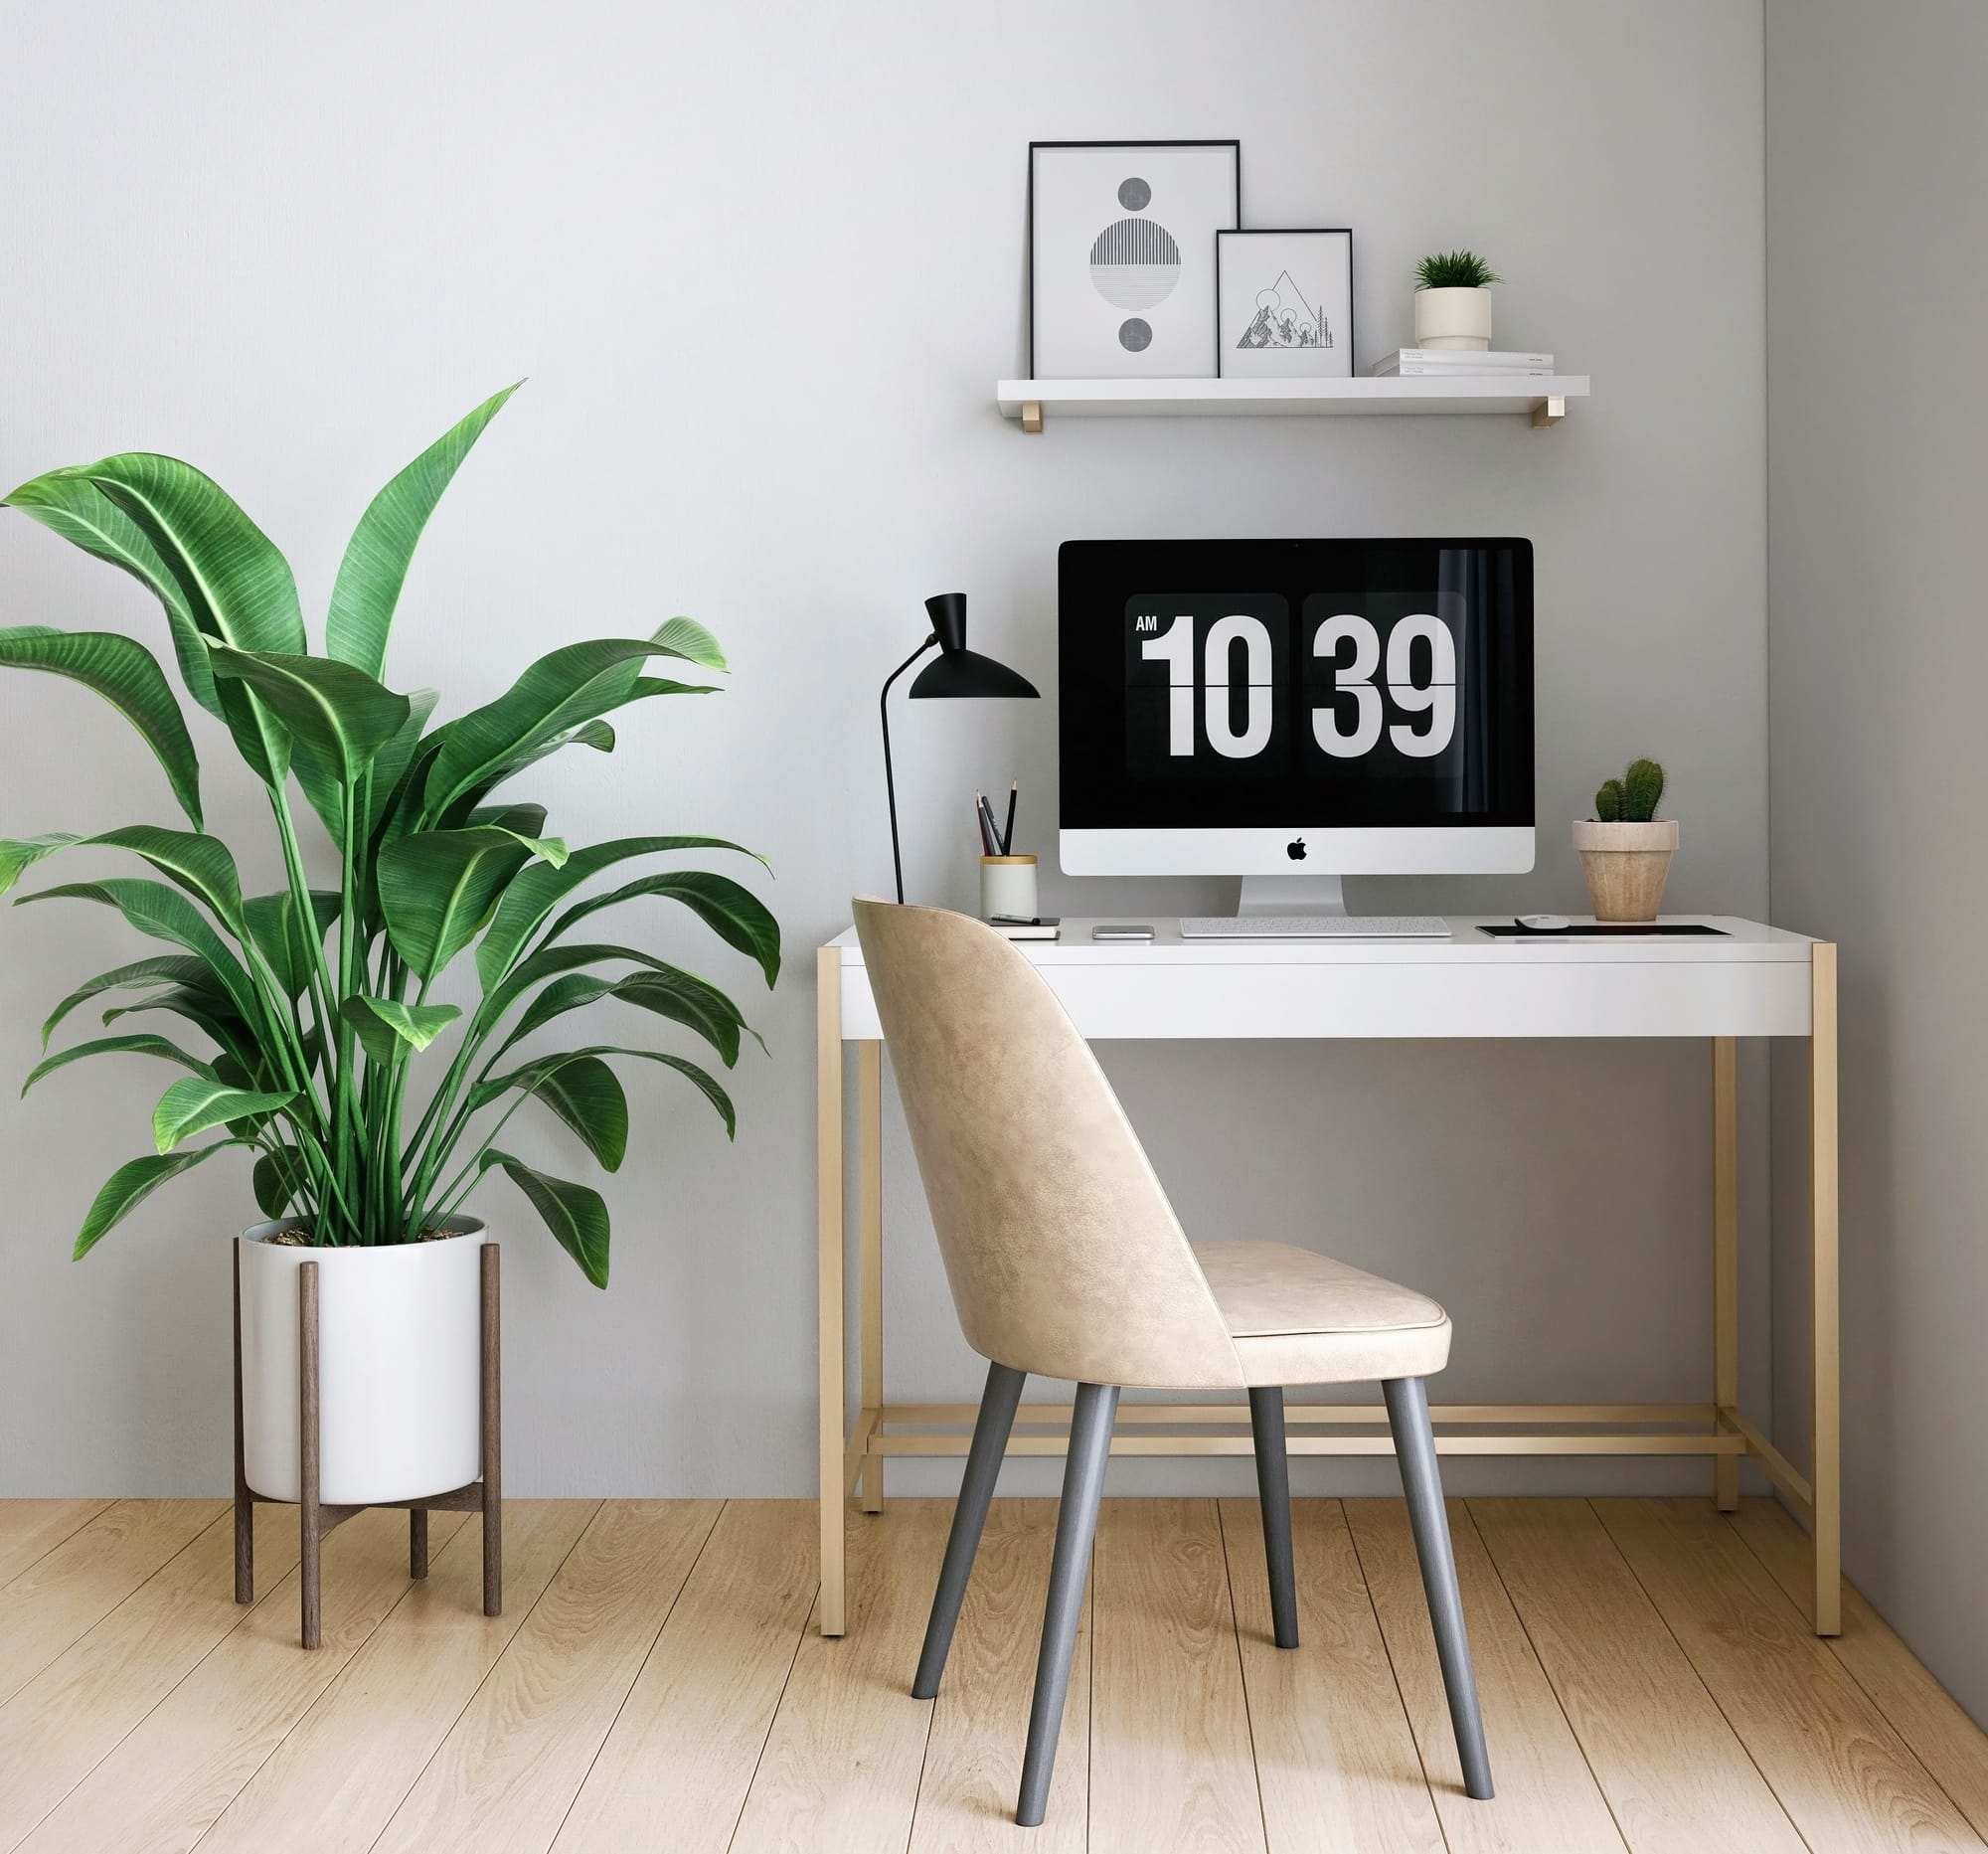 A simple bedroom with a desk and plant